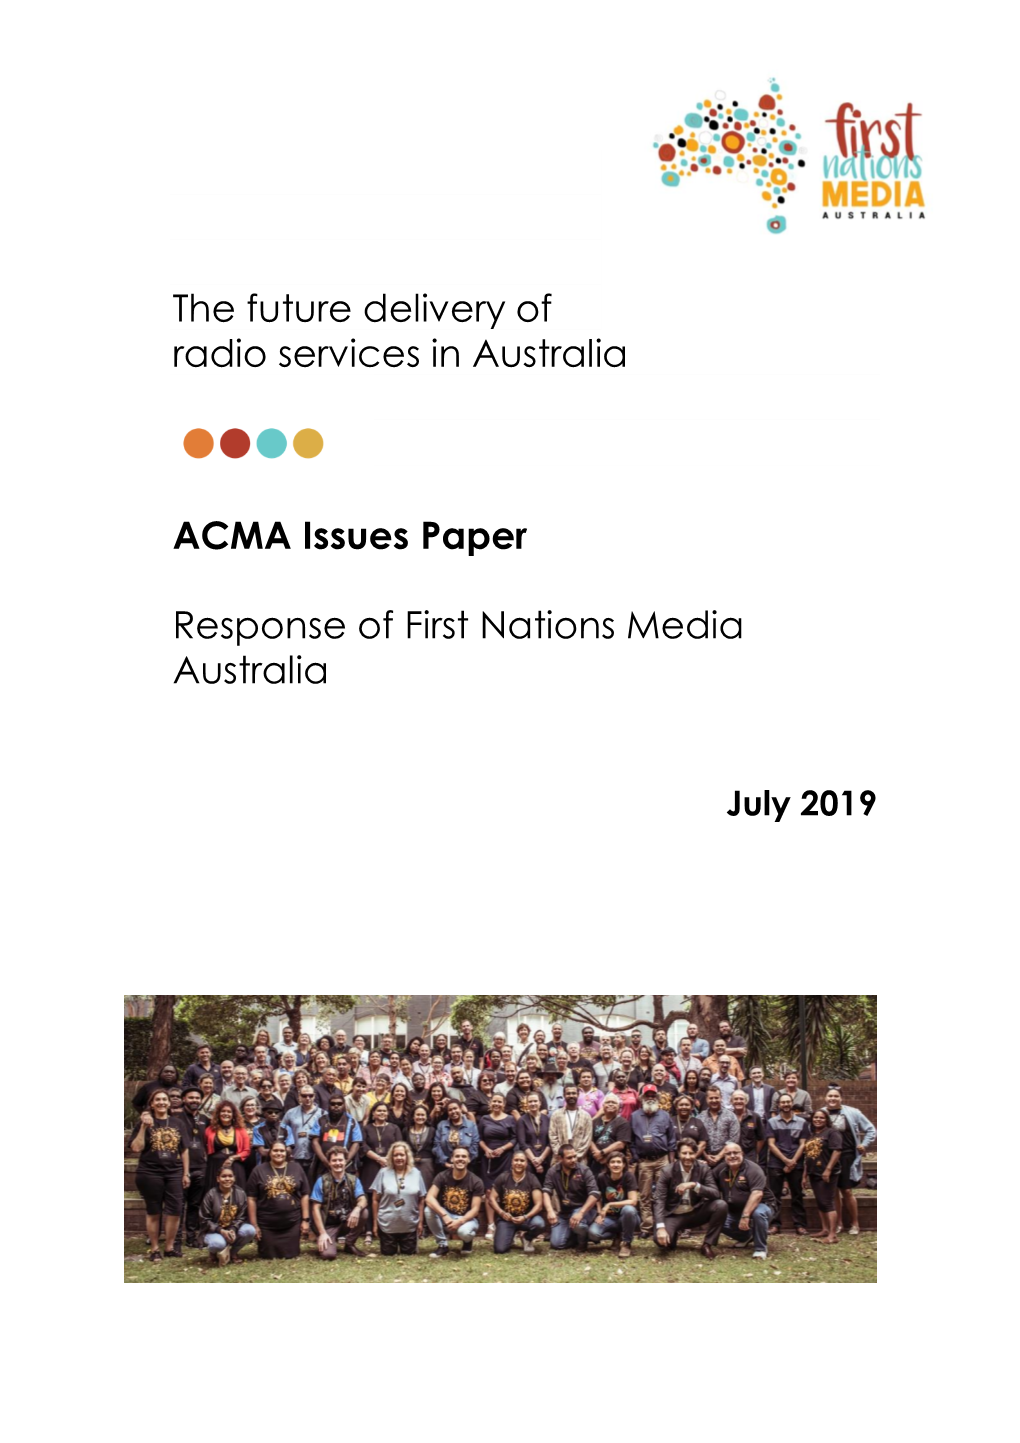 The Future Delivery of Radio Services in Australia ACMA Issues Paper